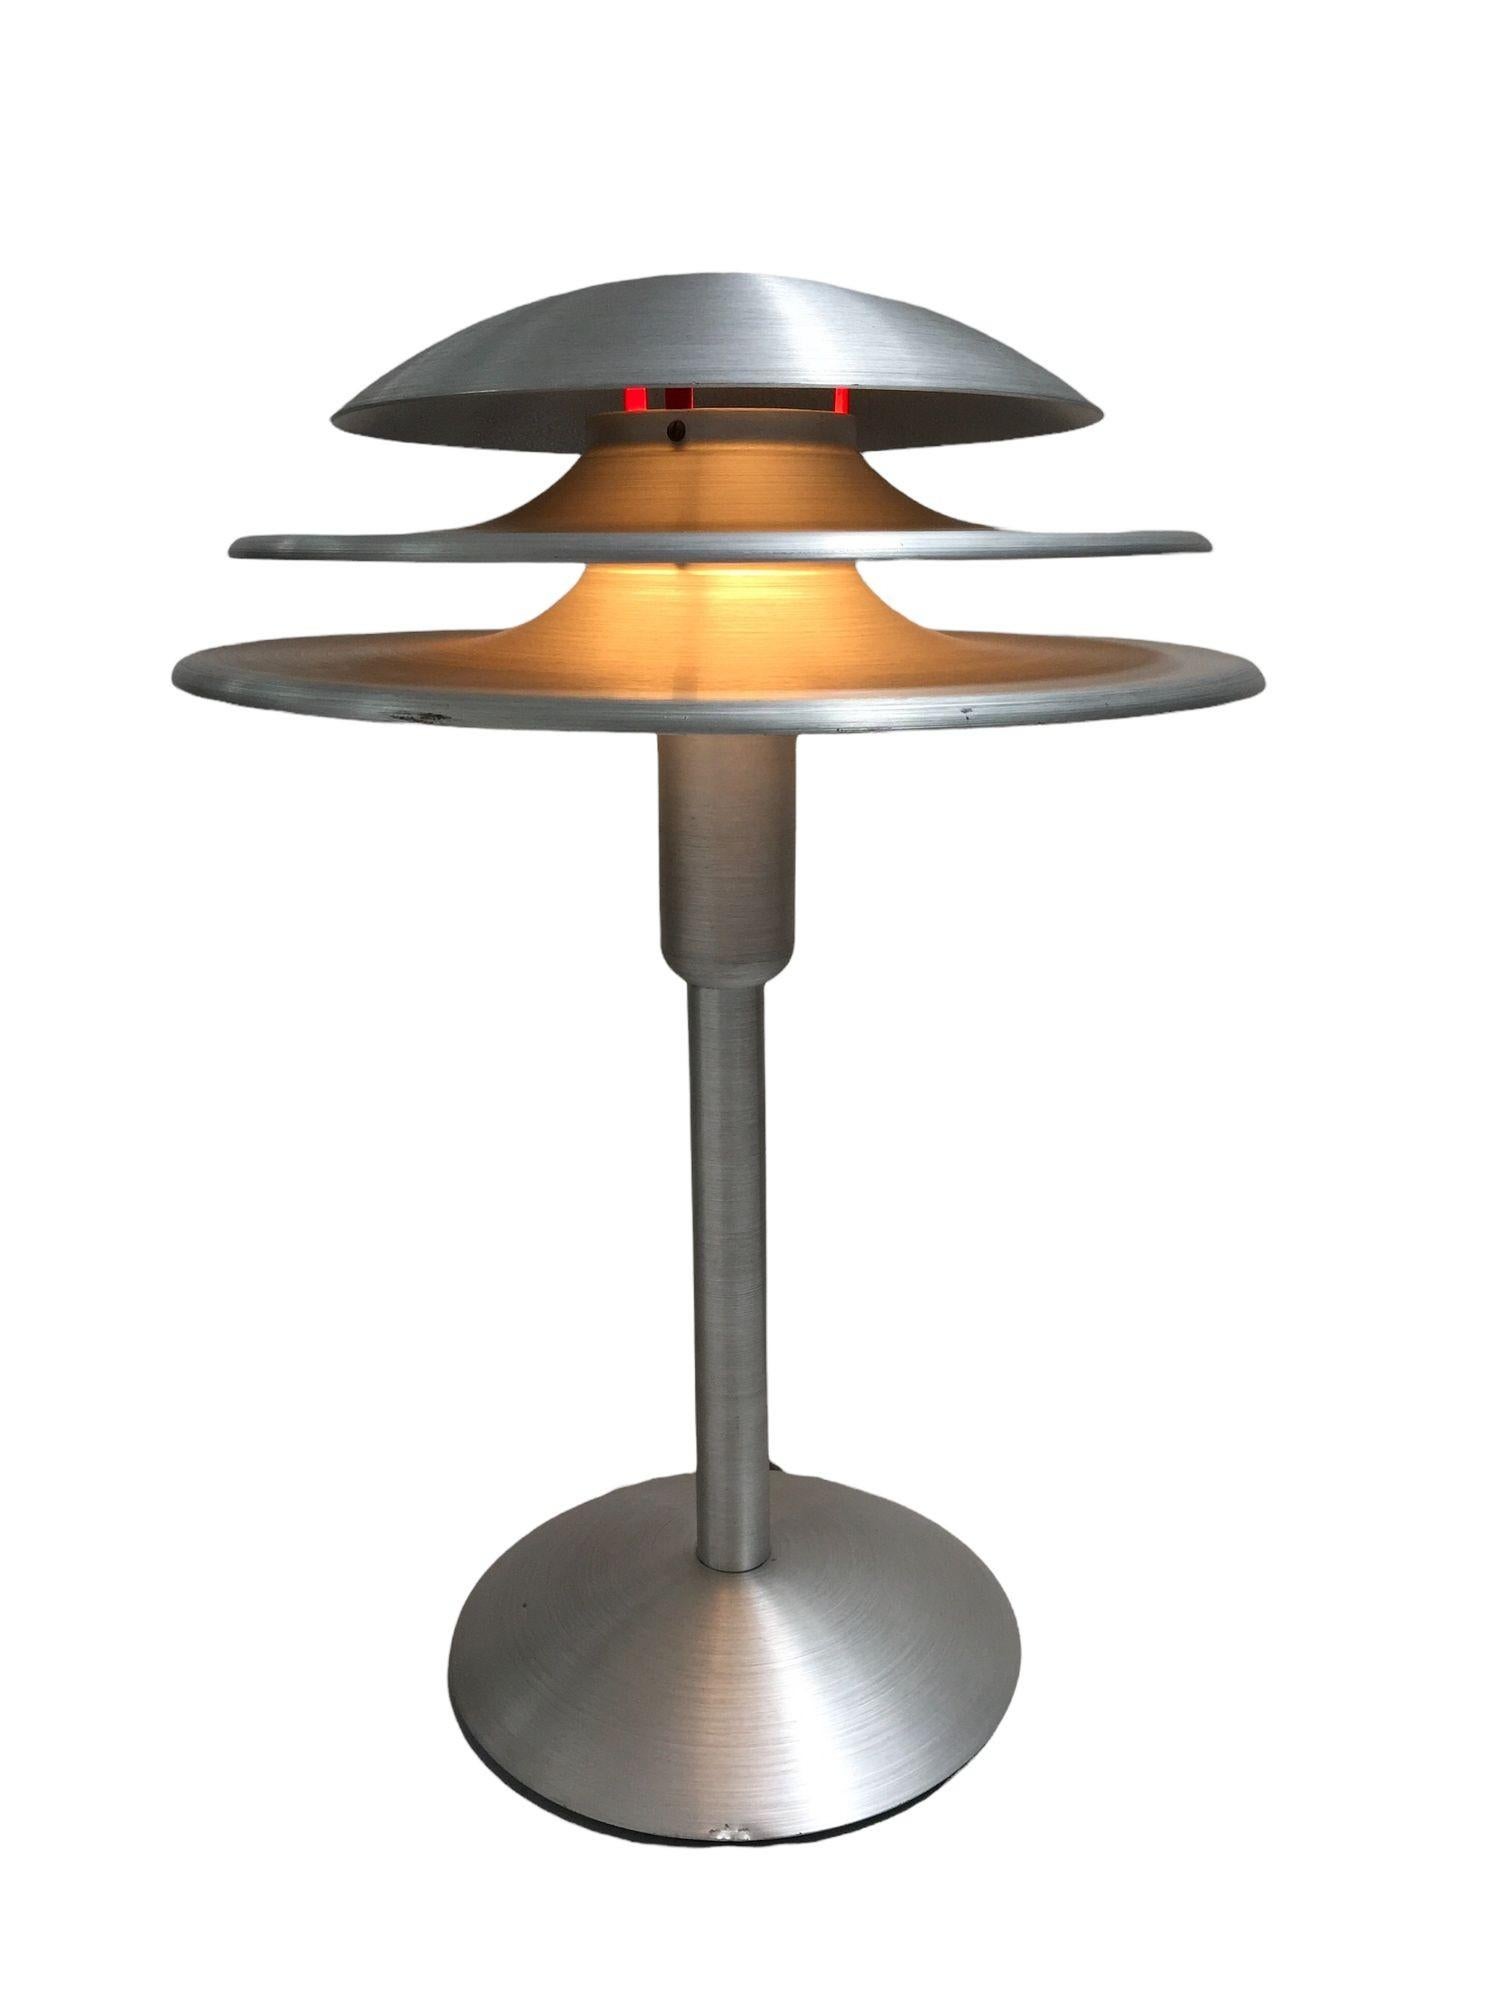 Art Deco Style machined and Brushed Aluminum Desk Lamp Features a 3-layered spun aluminum shade and a spun aluminum body. The surface has a nice brushed finish to them, making them a 1930s machined age look. They have a dimmable switch with 2 stops